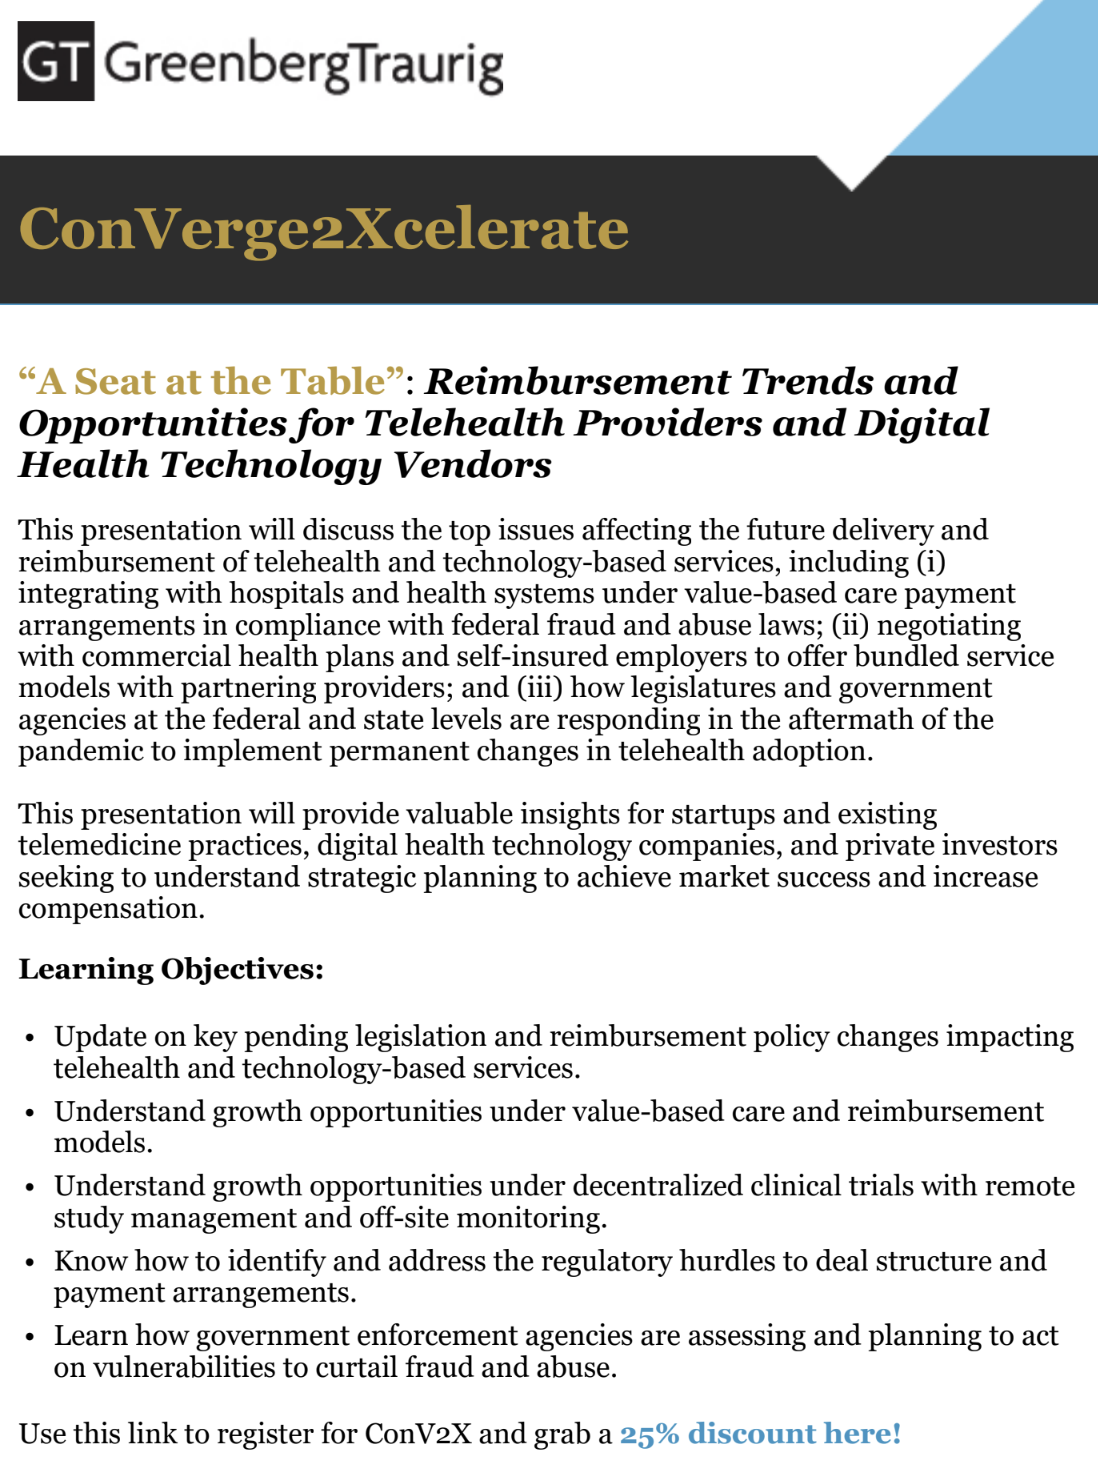 "A Seat at the Table": Reimbursement Trends and Opportunities for Telehealth Providers and Digital Health Technology Vendors